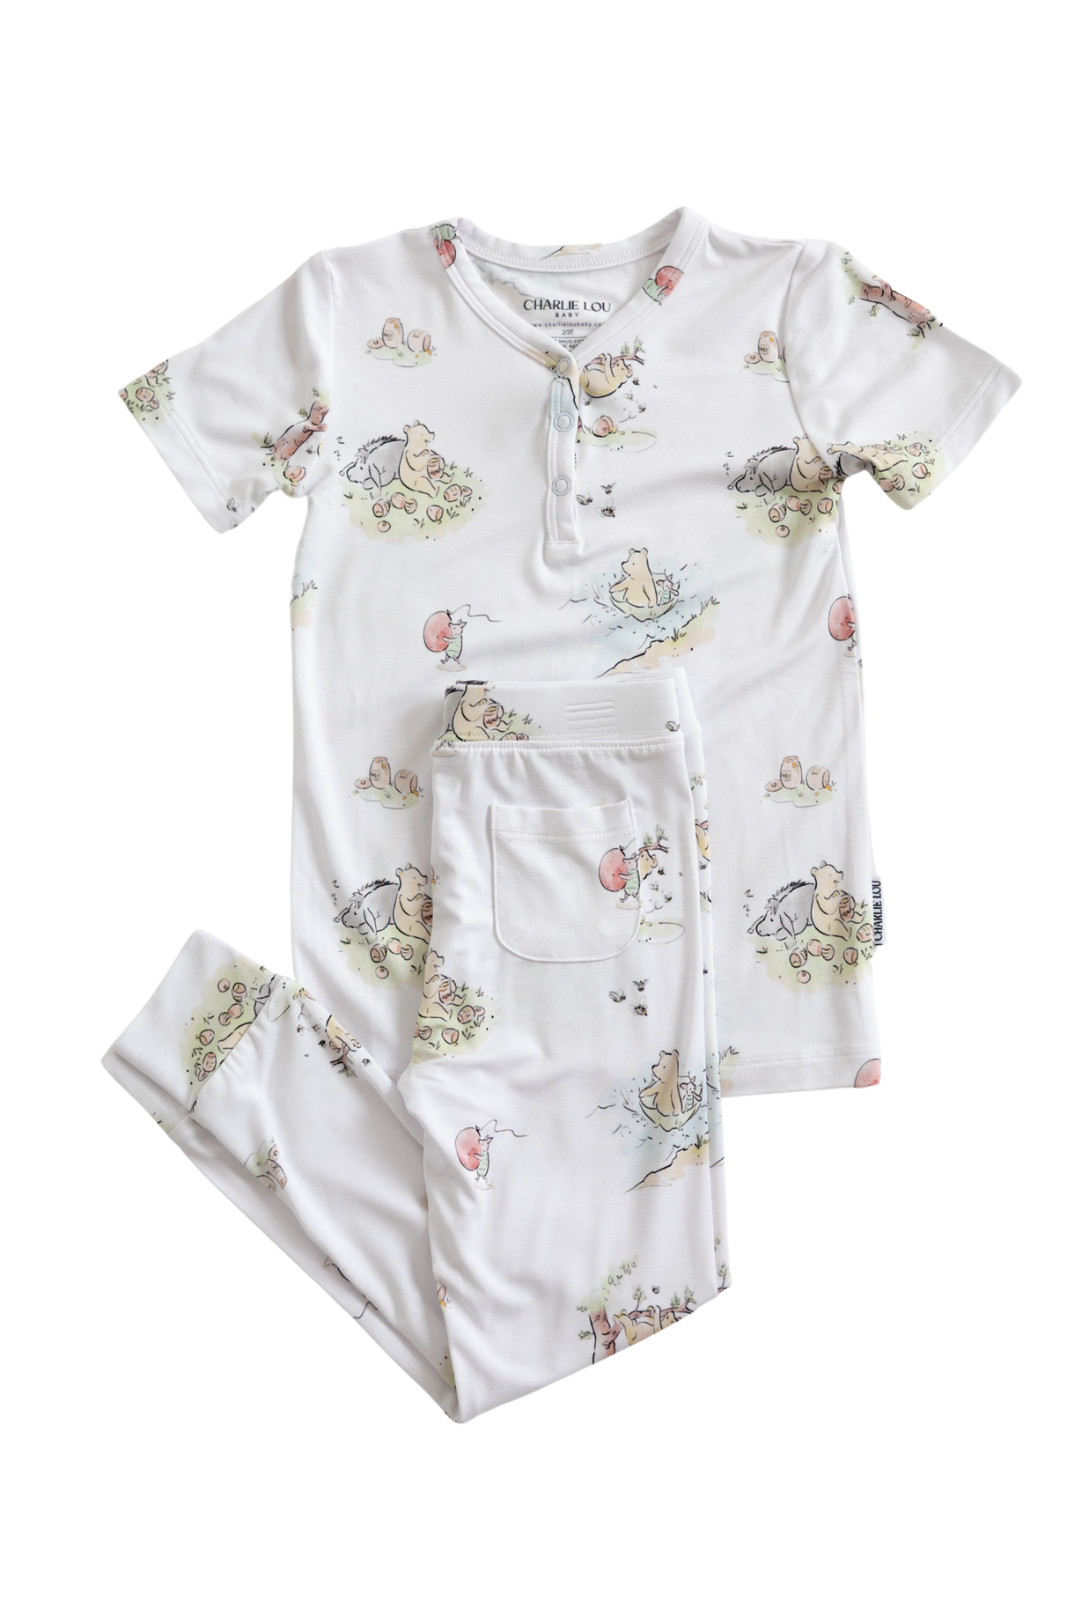 Winnie the Pooh Bamboo two piece pajama set which is gender neutral.